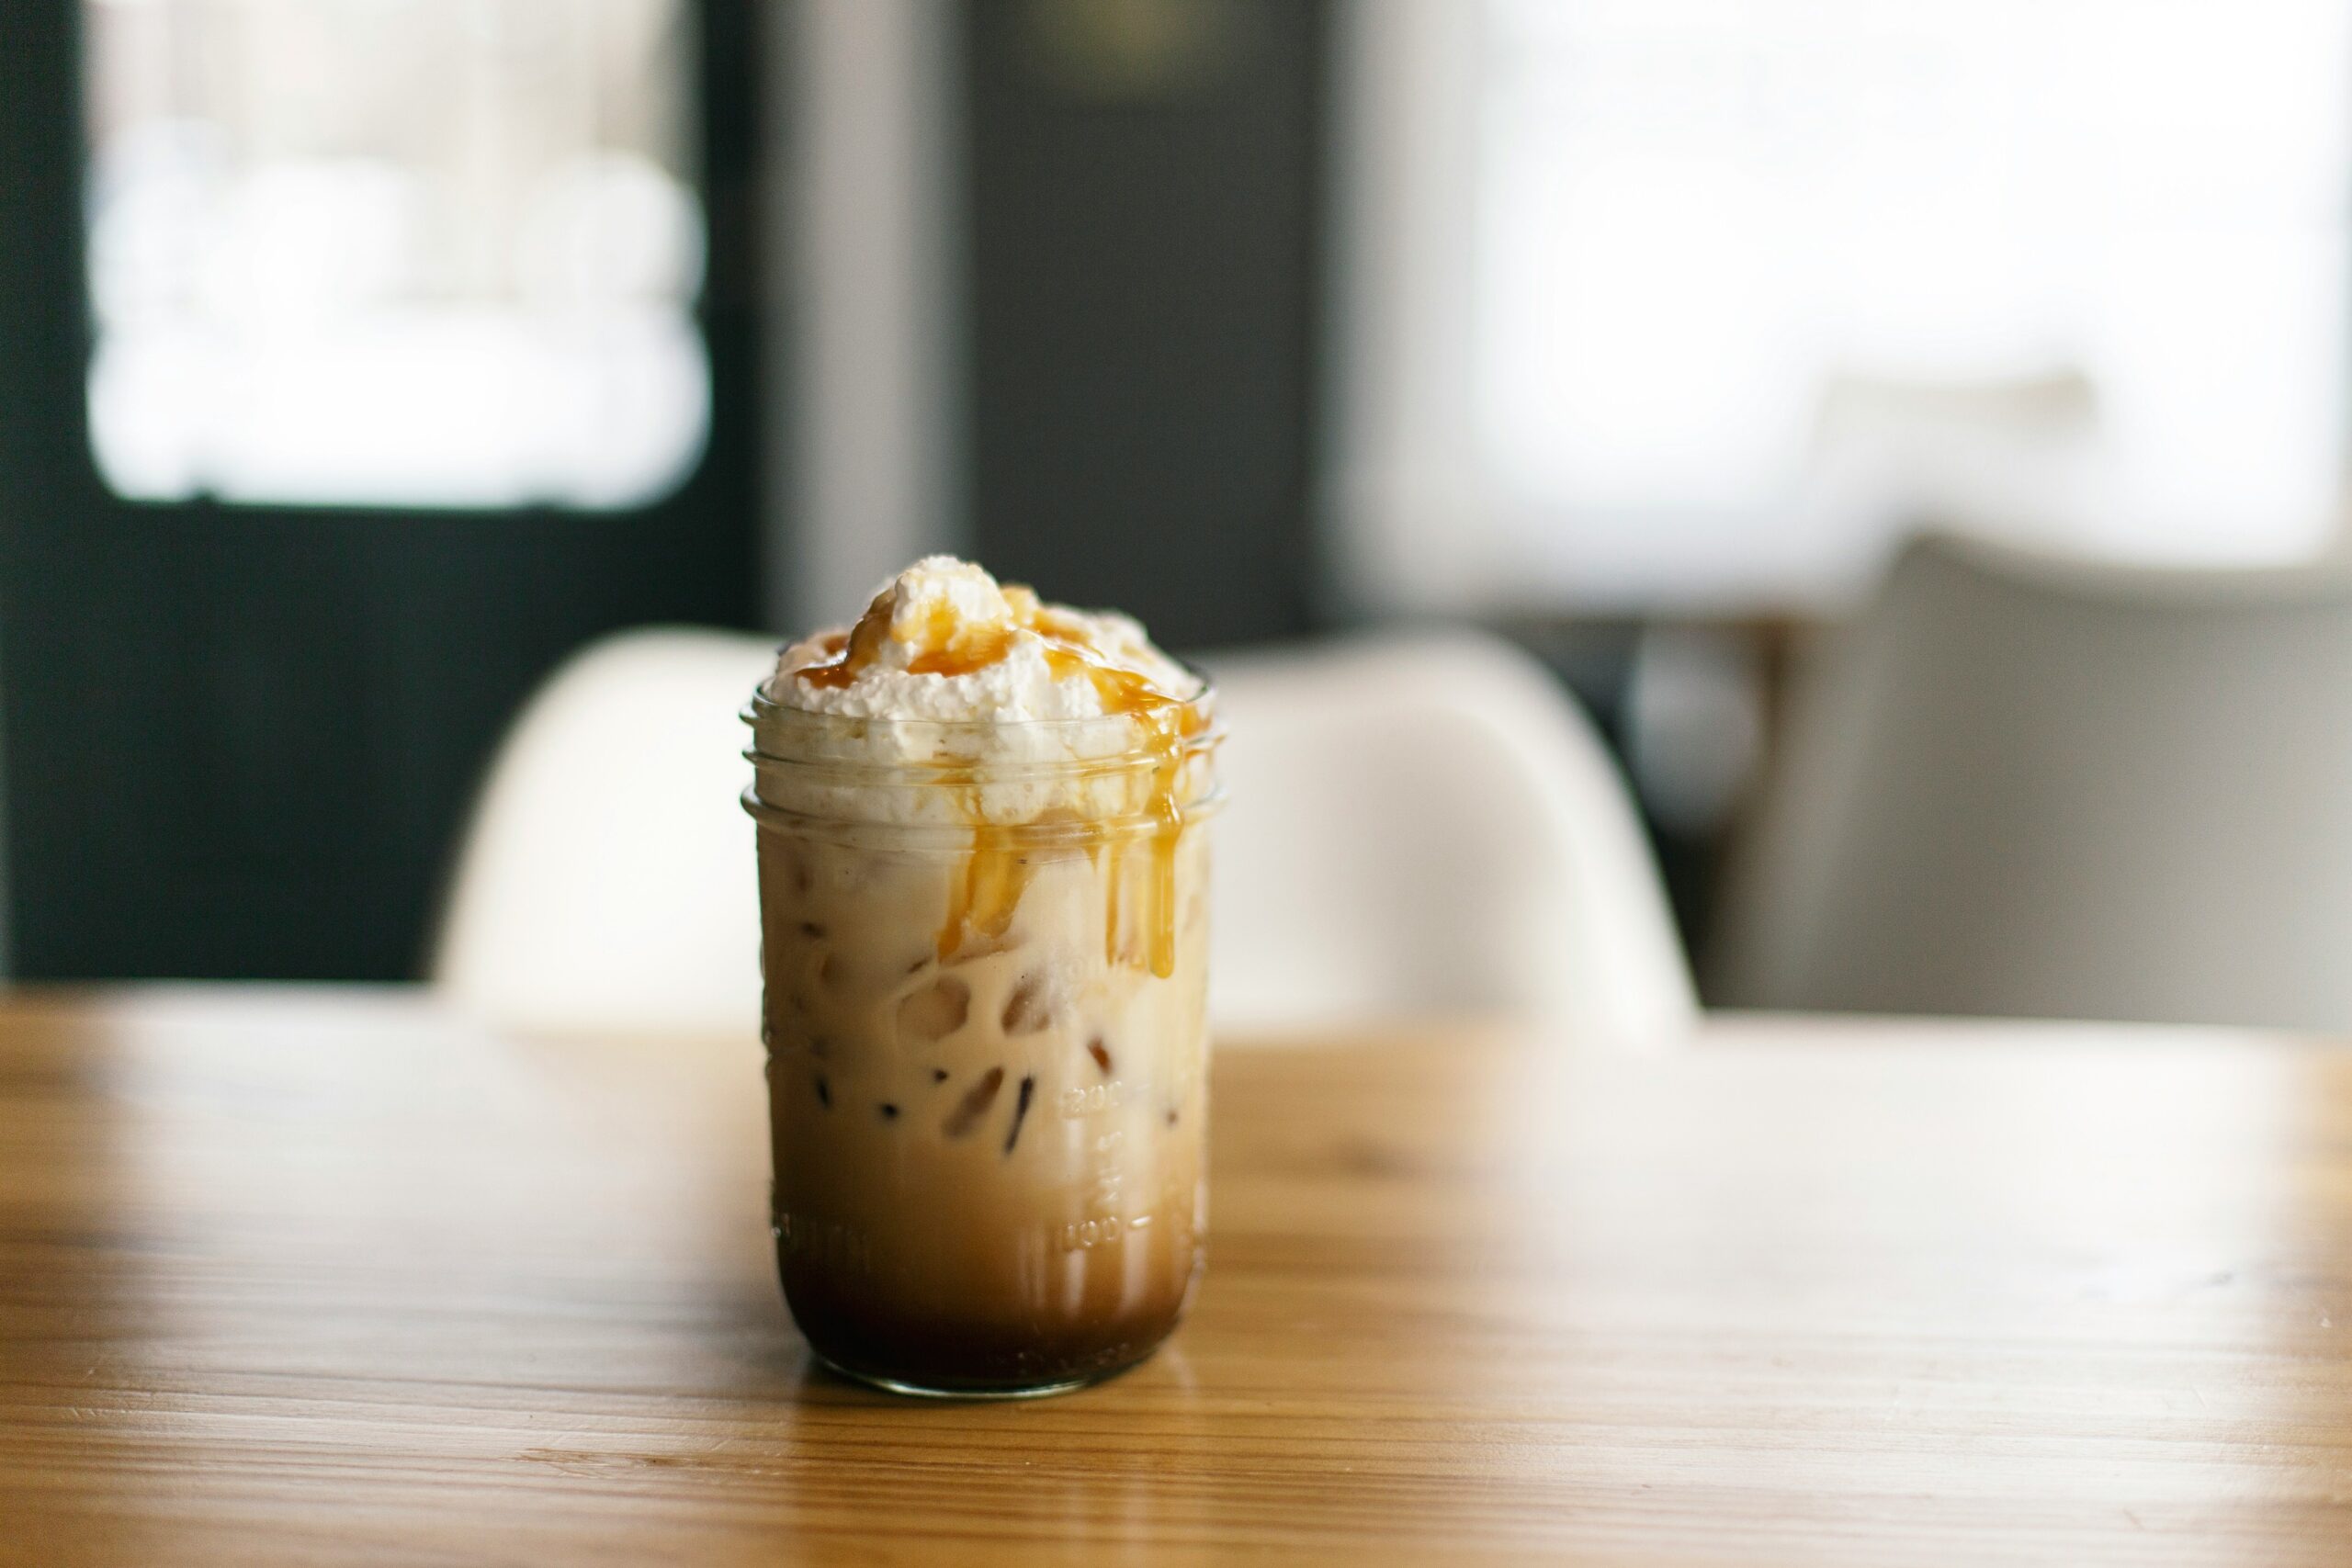 The iced butterbeer latte is one of the best Nespresso recipes for Harry Potter fans. Pictured: Iced latte